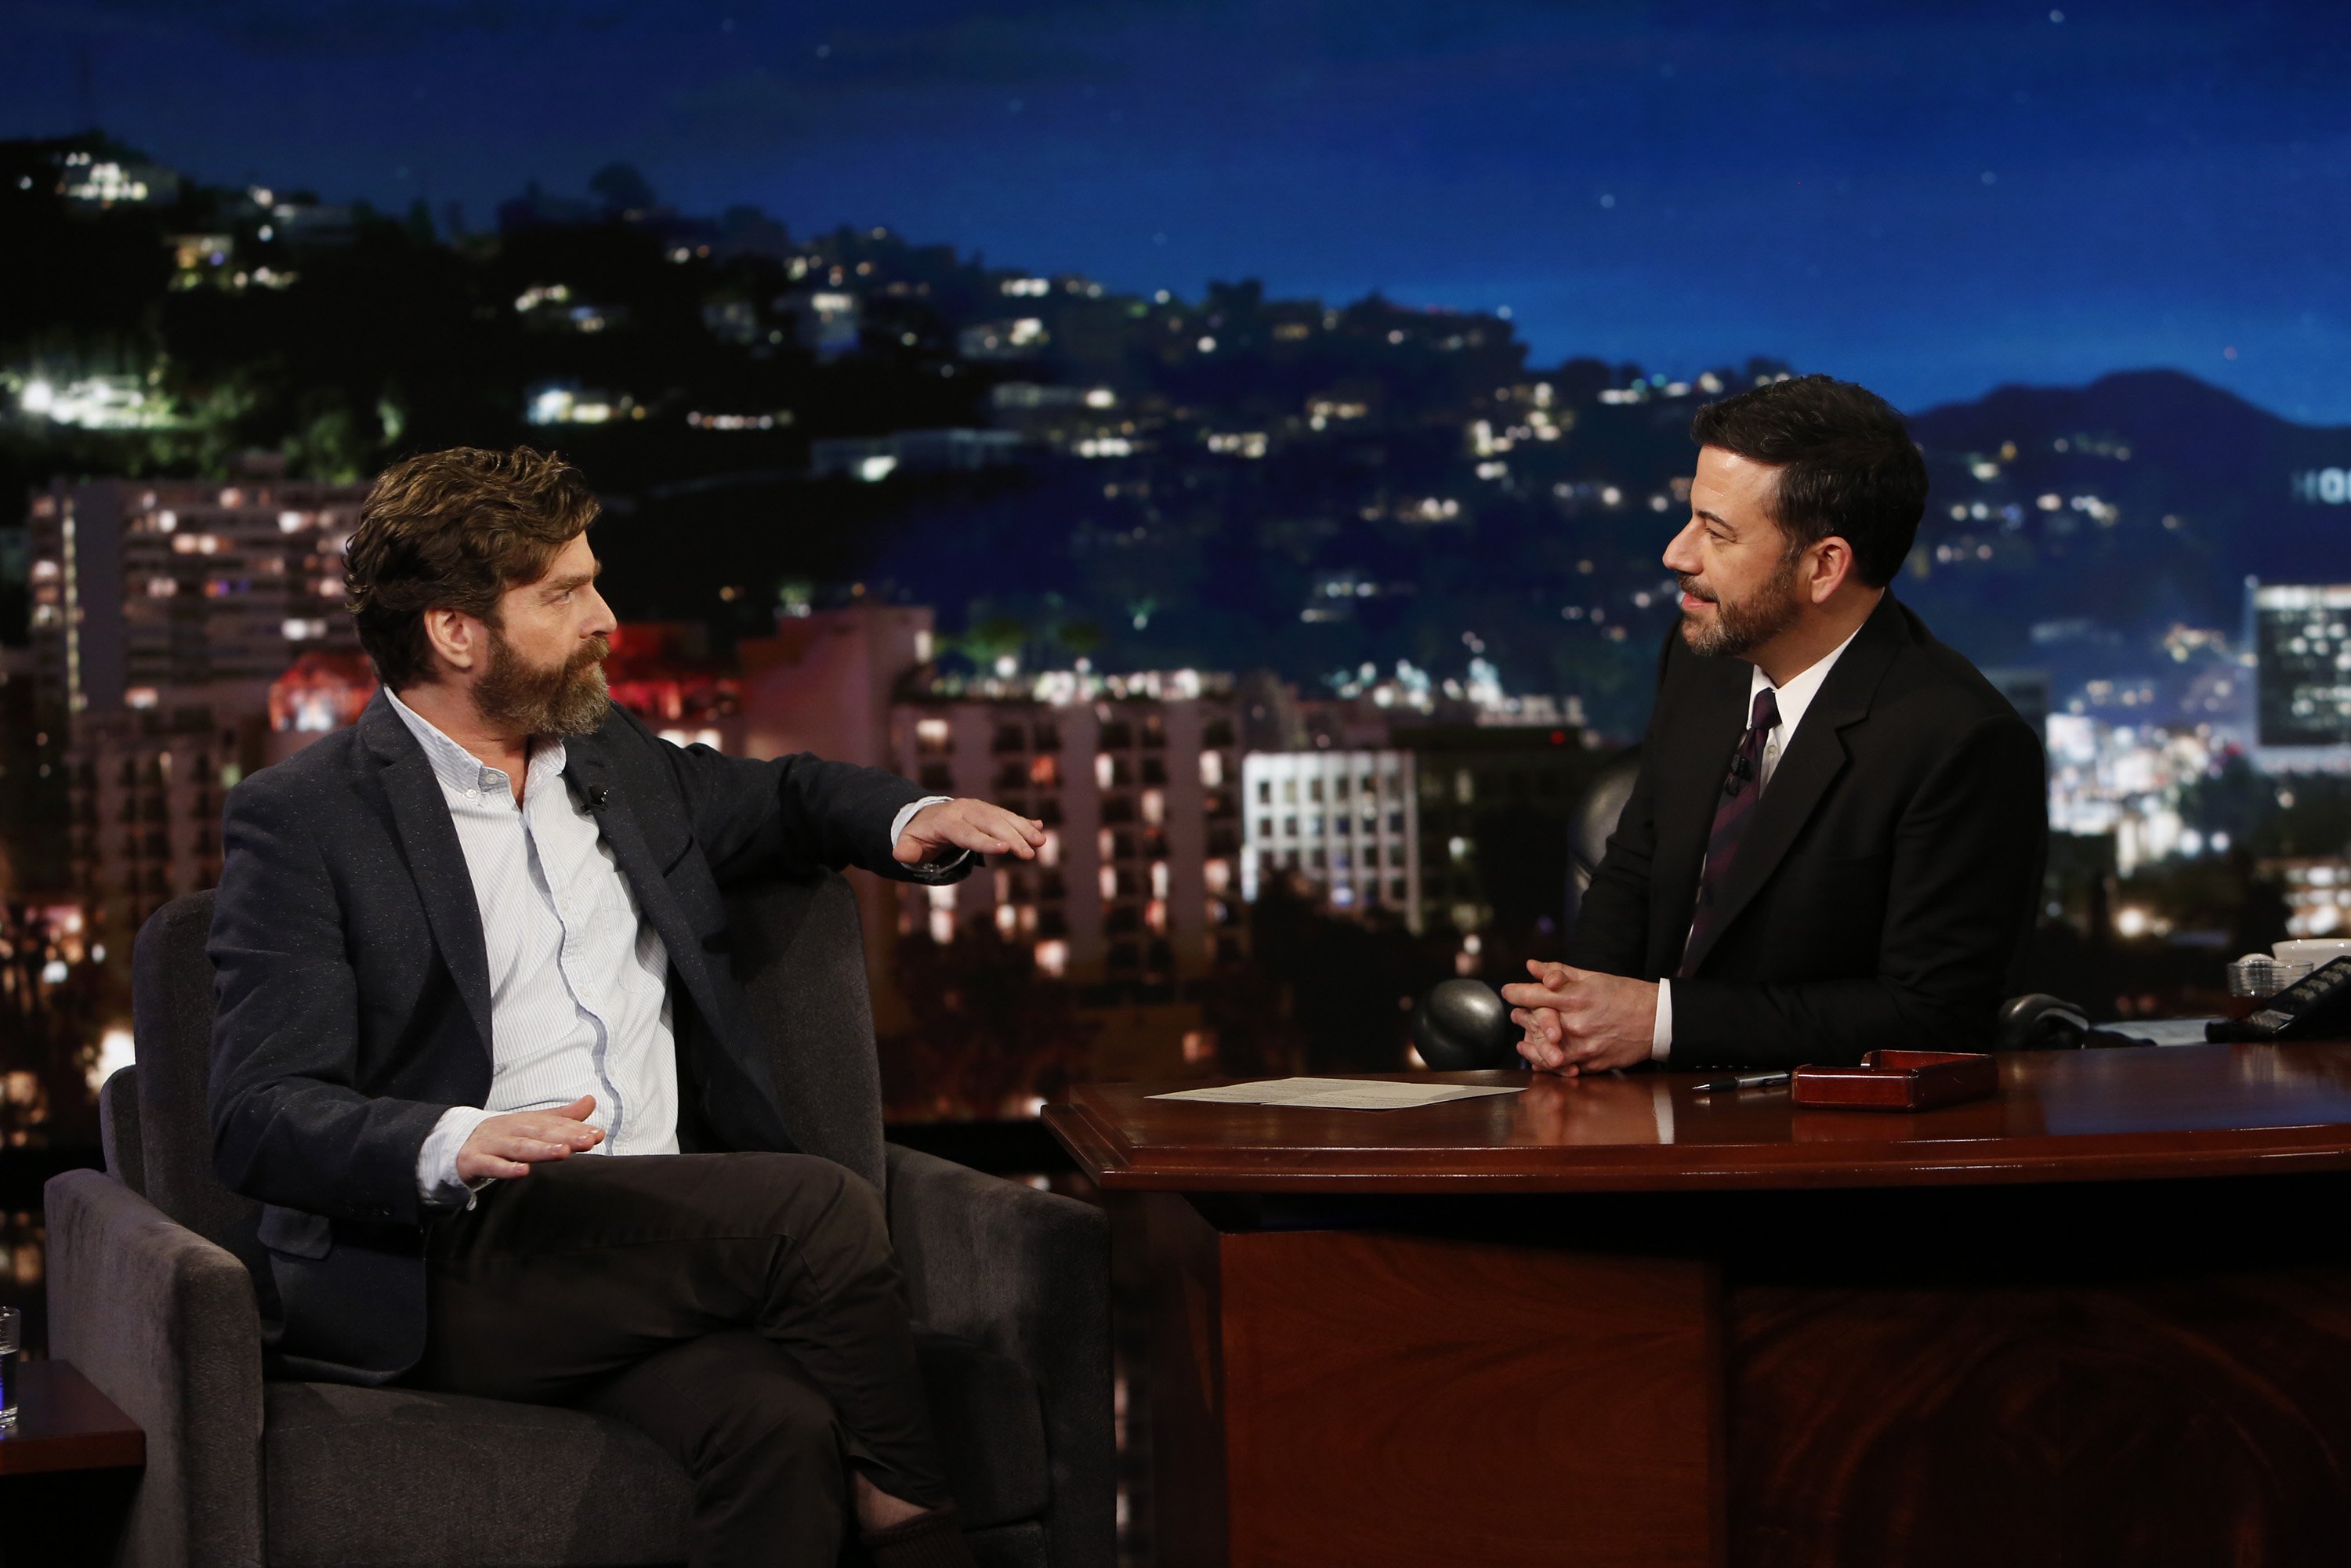 Actor Zach Galifianakis speaking about corporate communication on Jimmy Kimmel Live on February 7, 2017. | Source: Getty Images